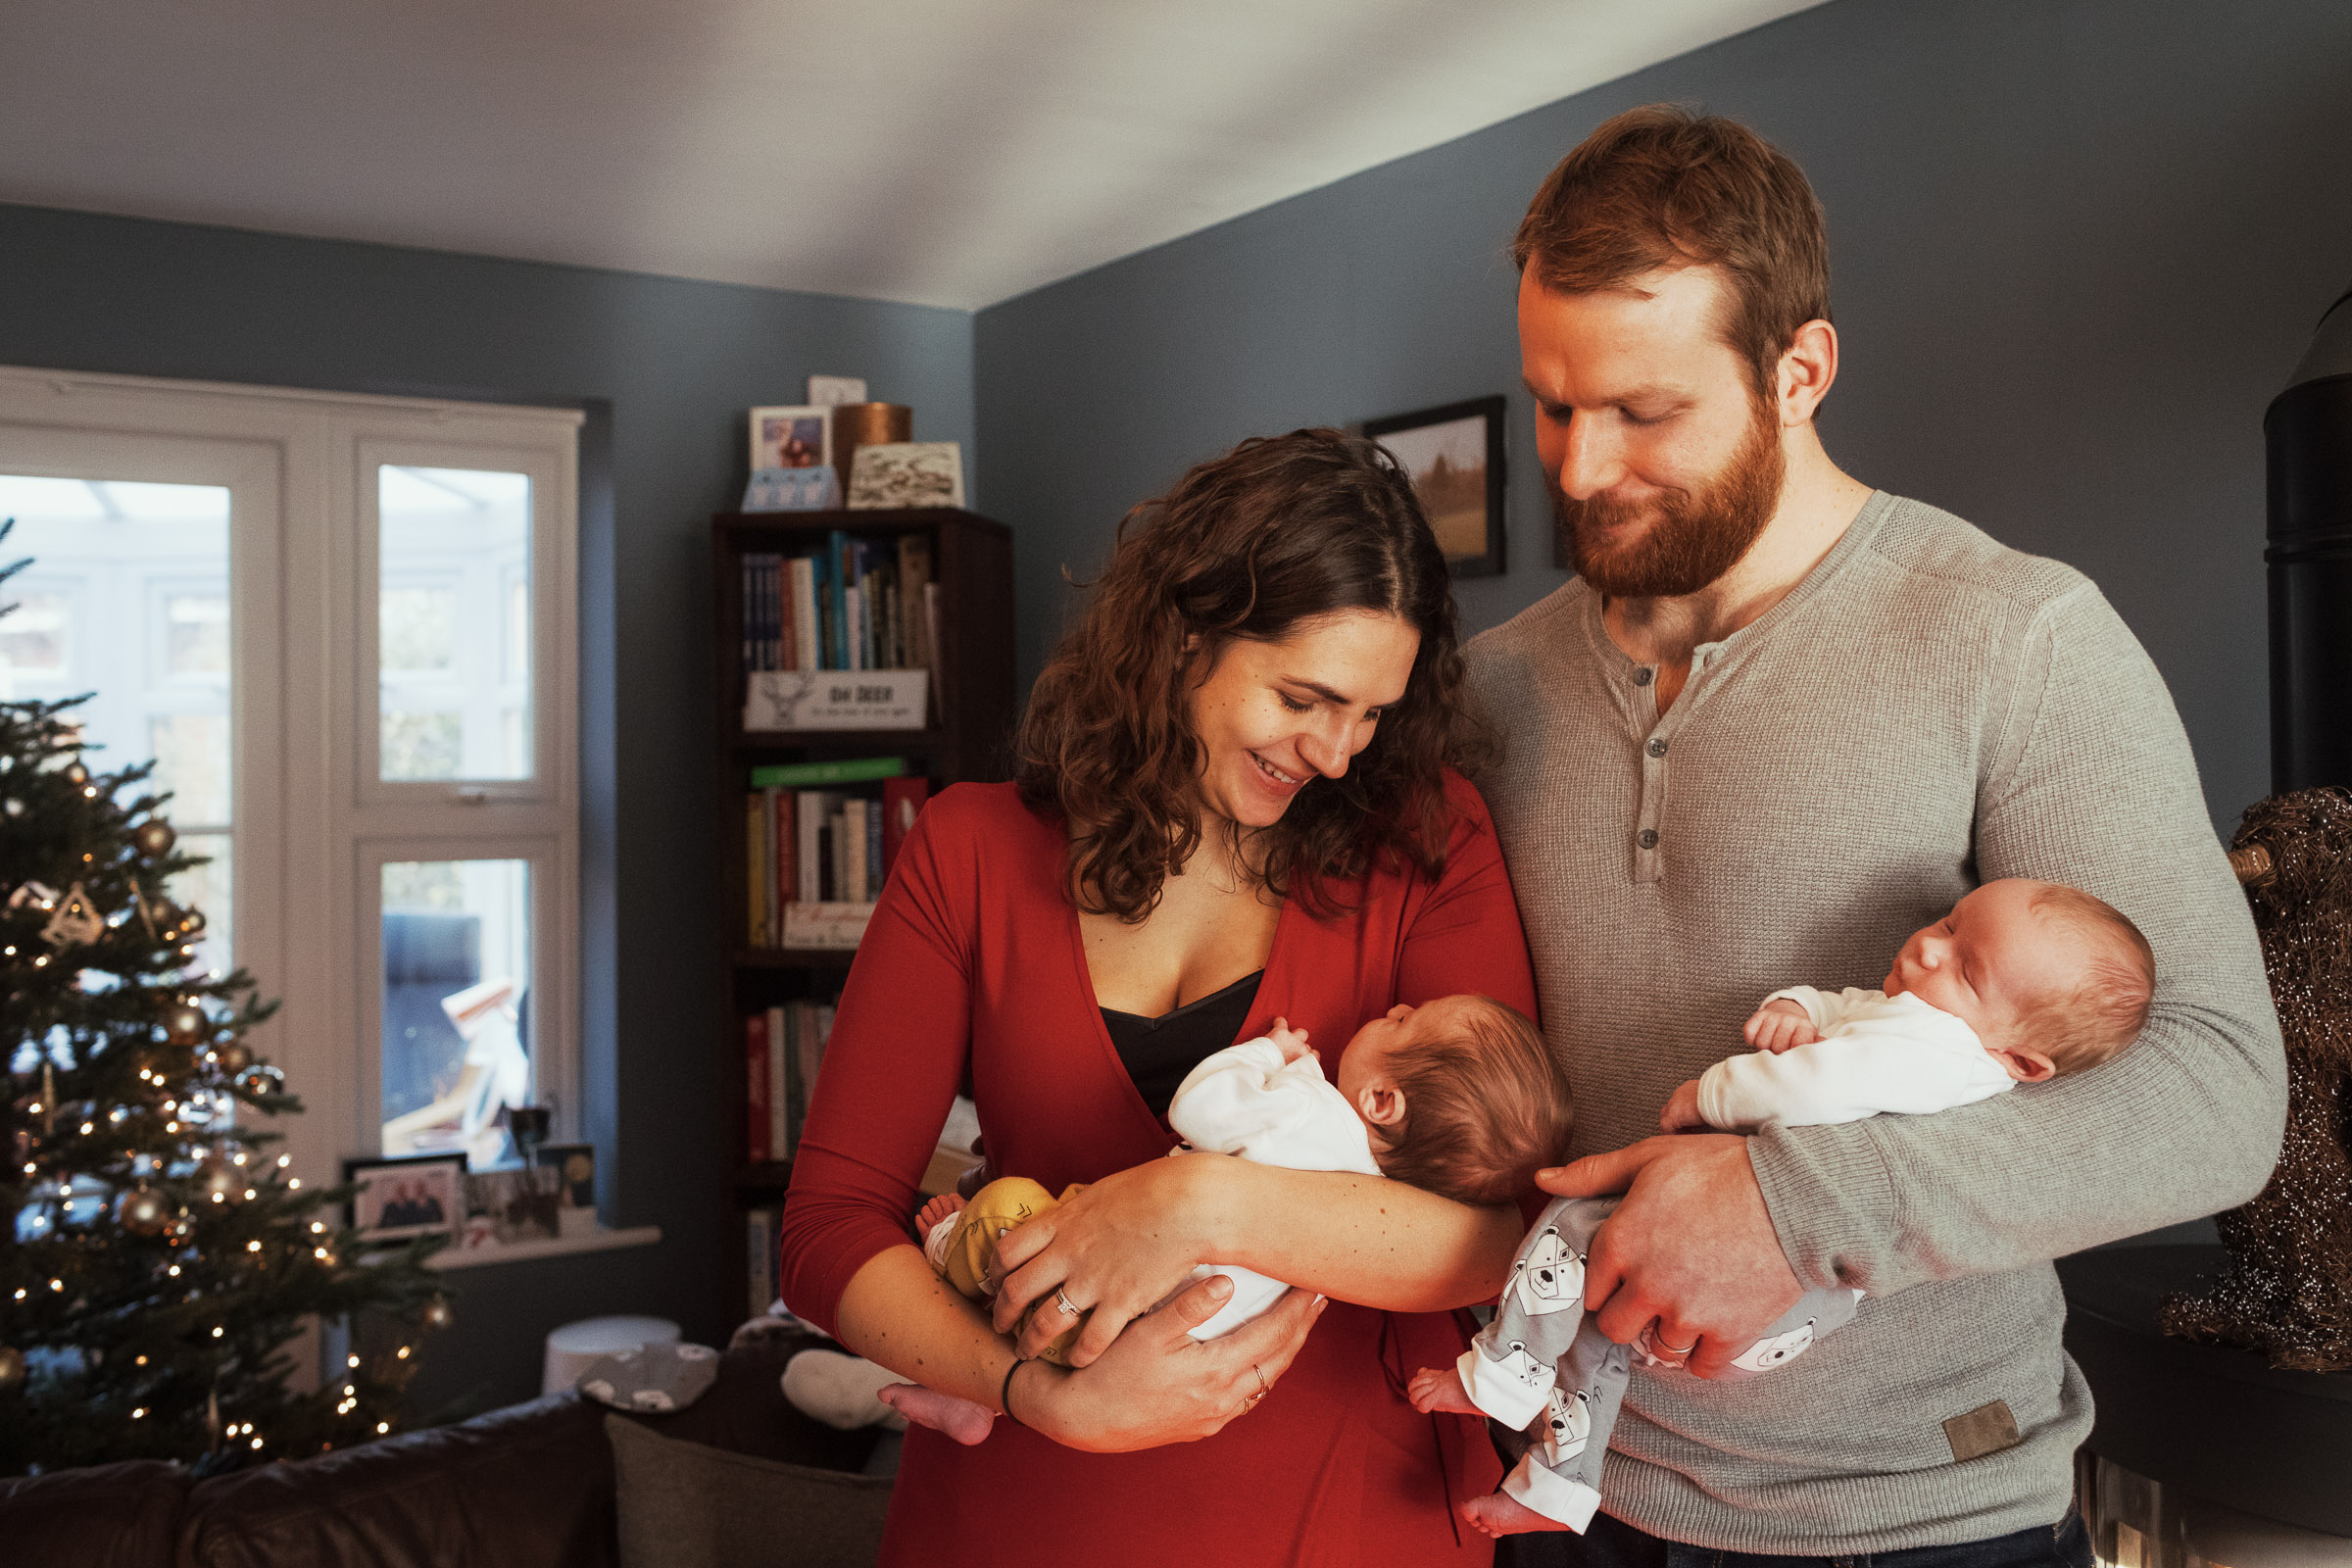 New parents holding their twin babies at Christmas. At home with a christmas tree behind. Family lifestyle photography.